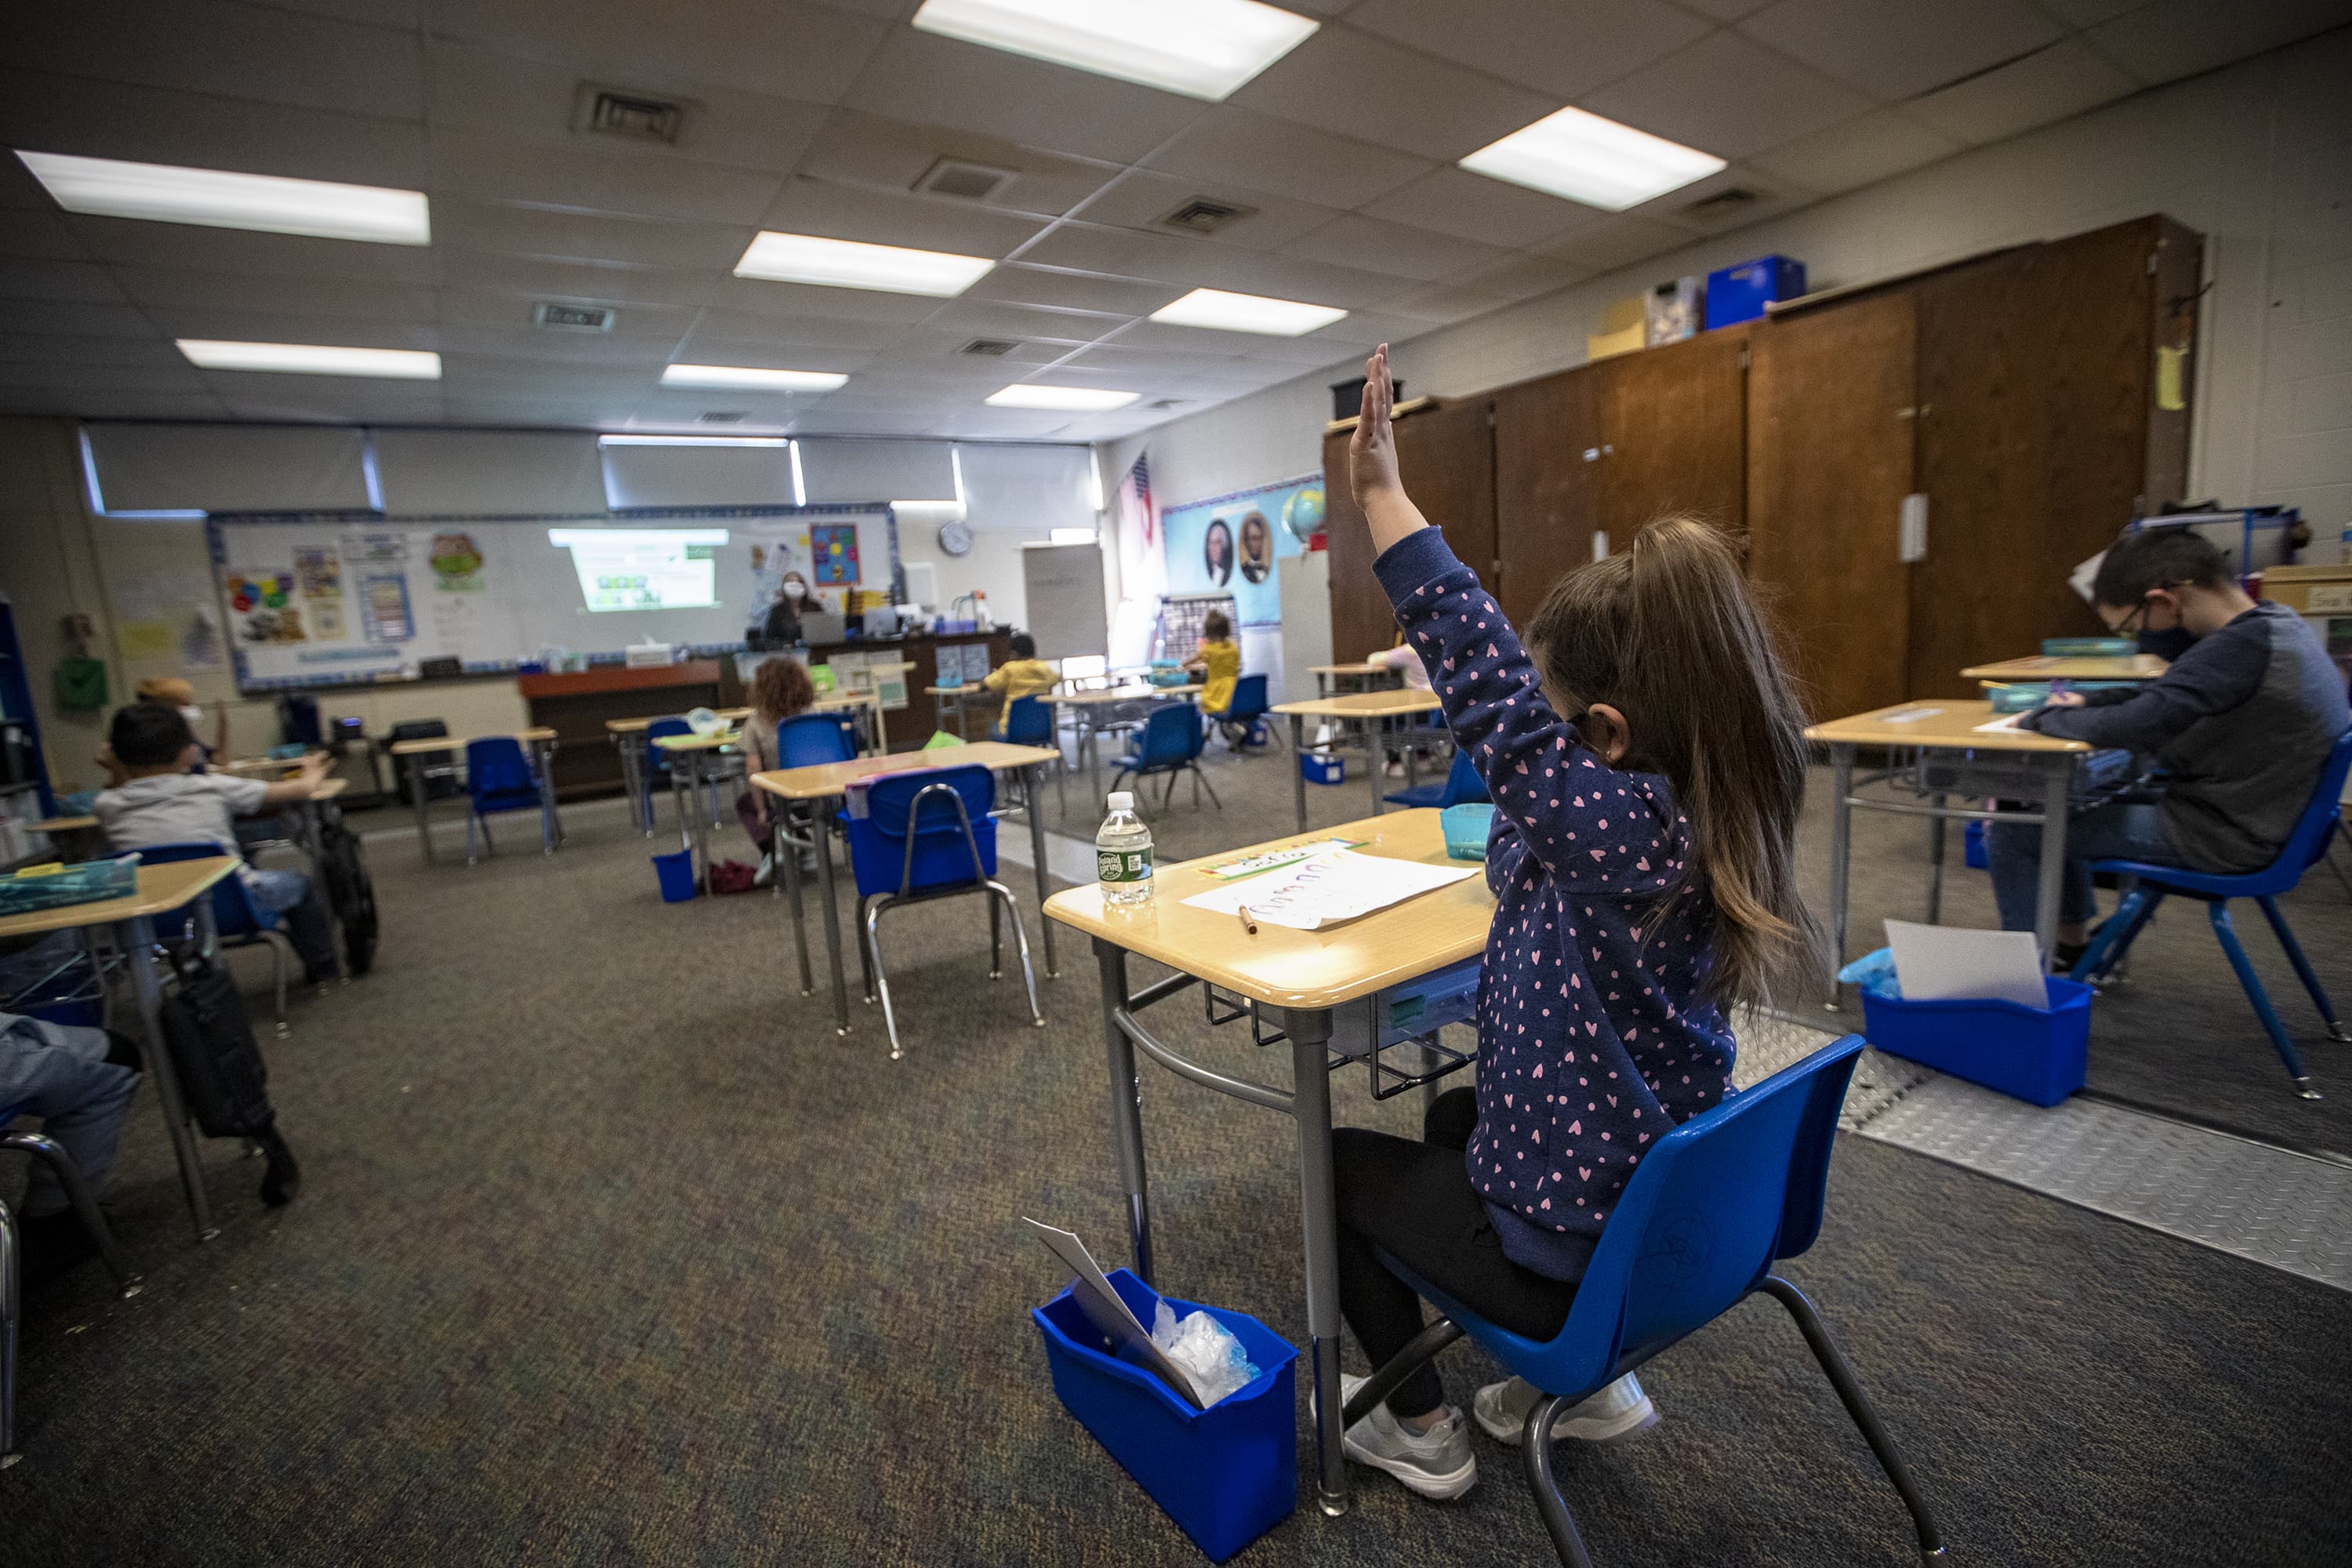 A student raises her hand during an English lesson at Barbieri Elementary School in Framingham. (Jesse Costa/WBUR)